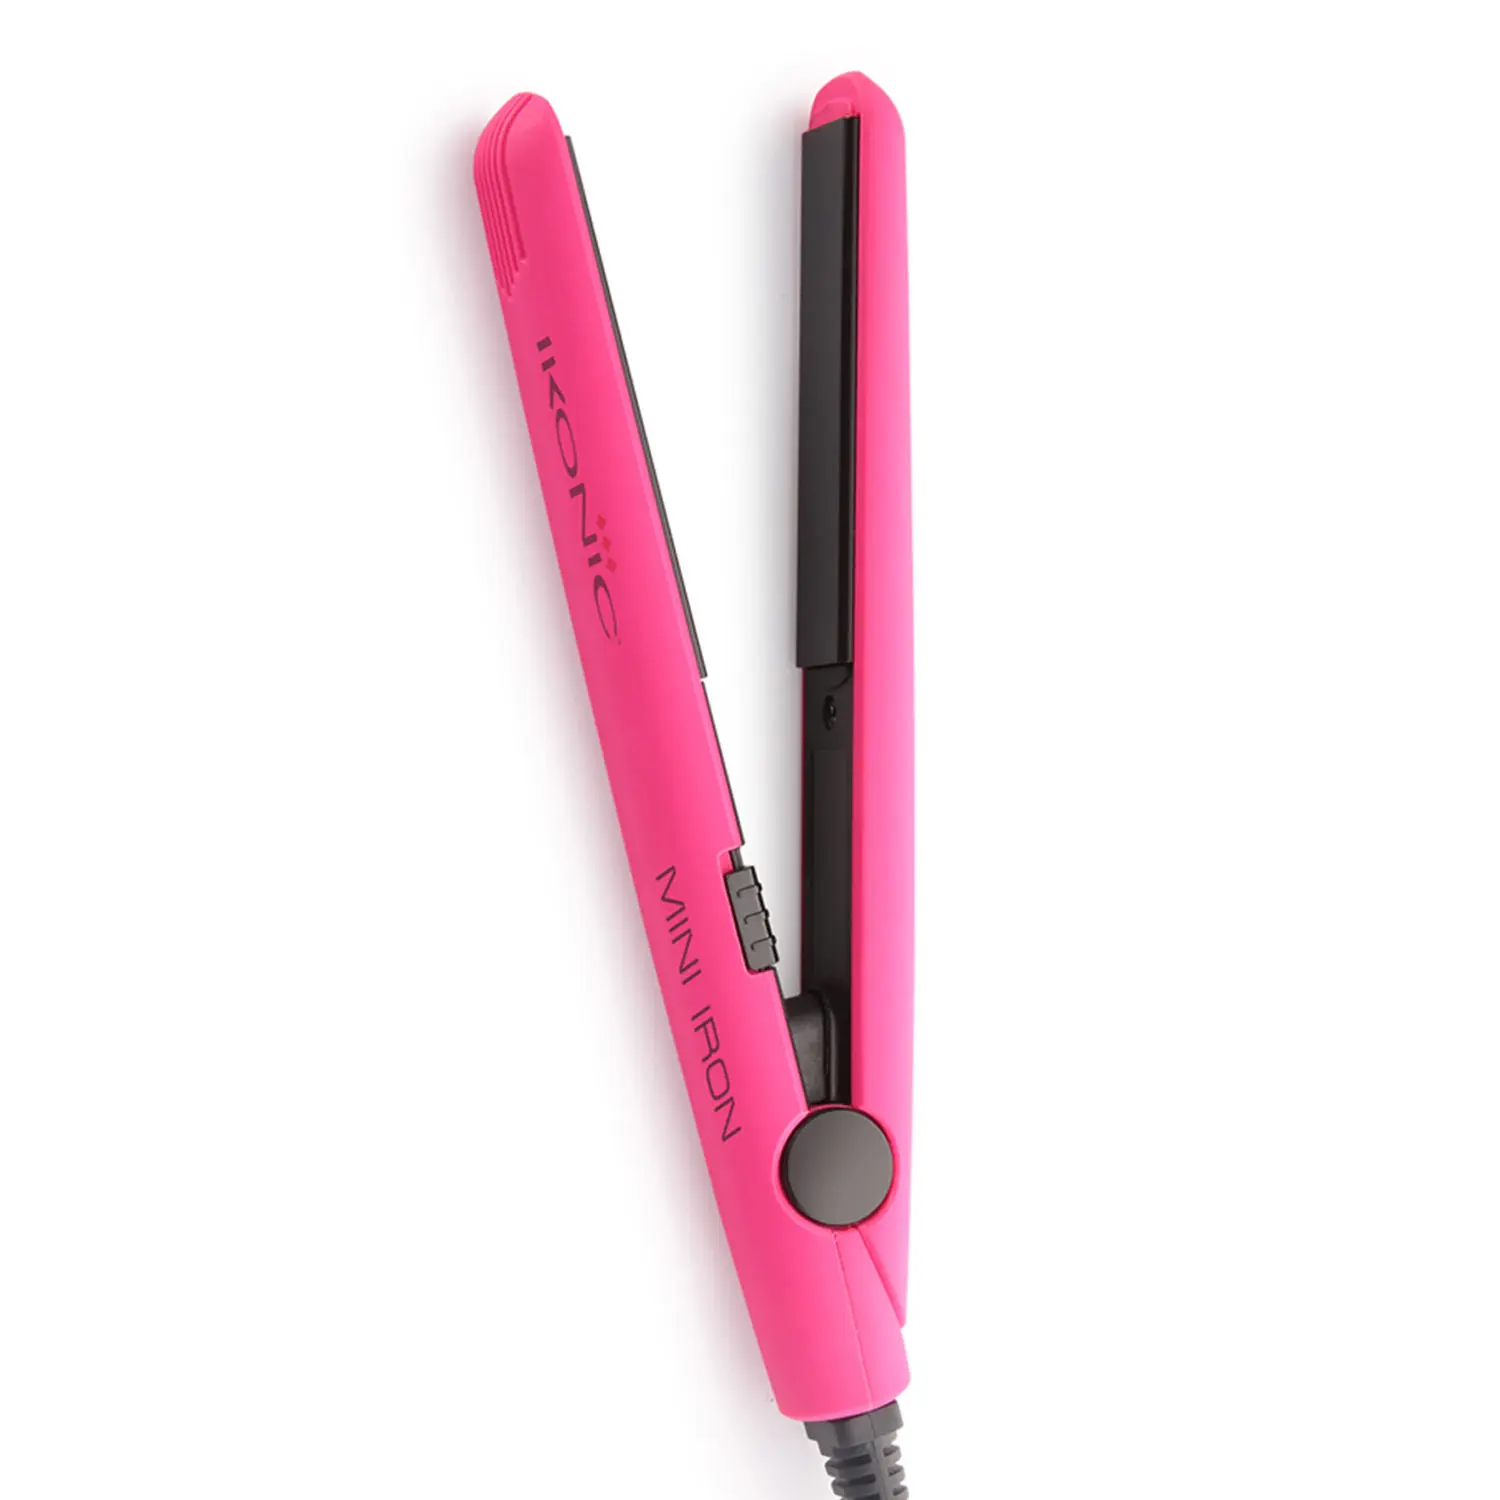 Ikonic Mini Hair Straigtner | Pink | Ceramic | Corded Electric | Hair Type - Thik & Thin | Heating Temperature - Up To 230 Degrees Celsius